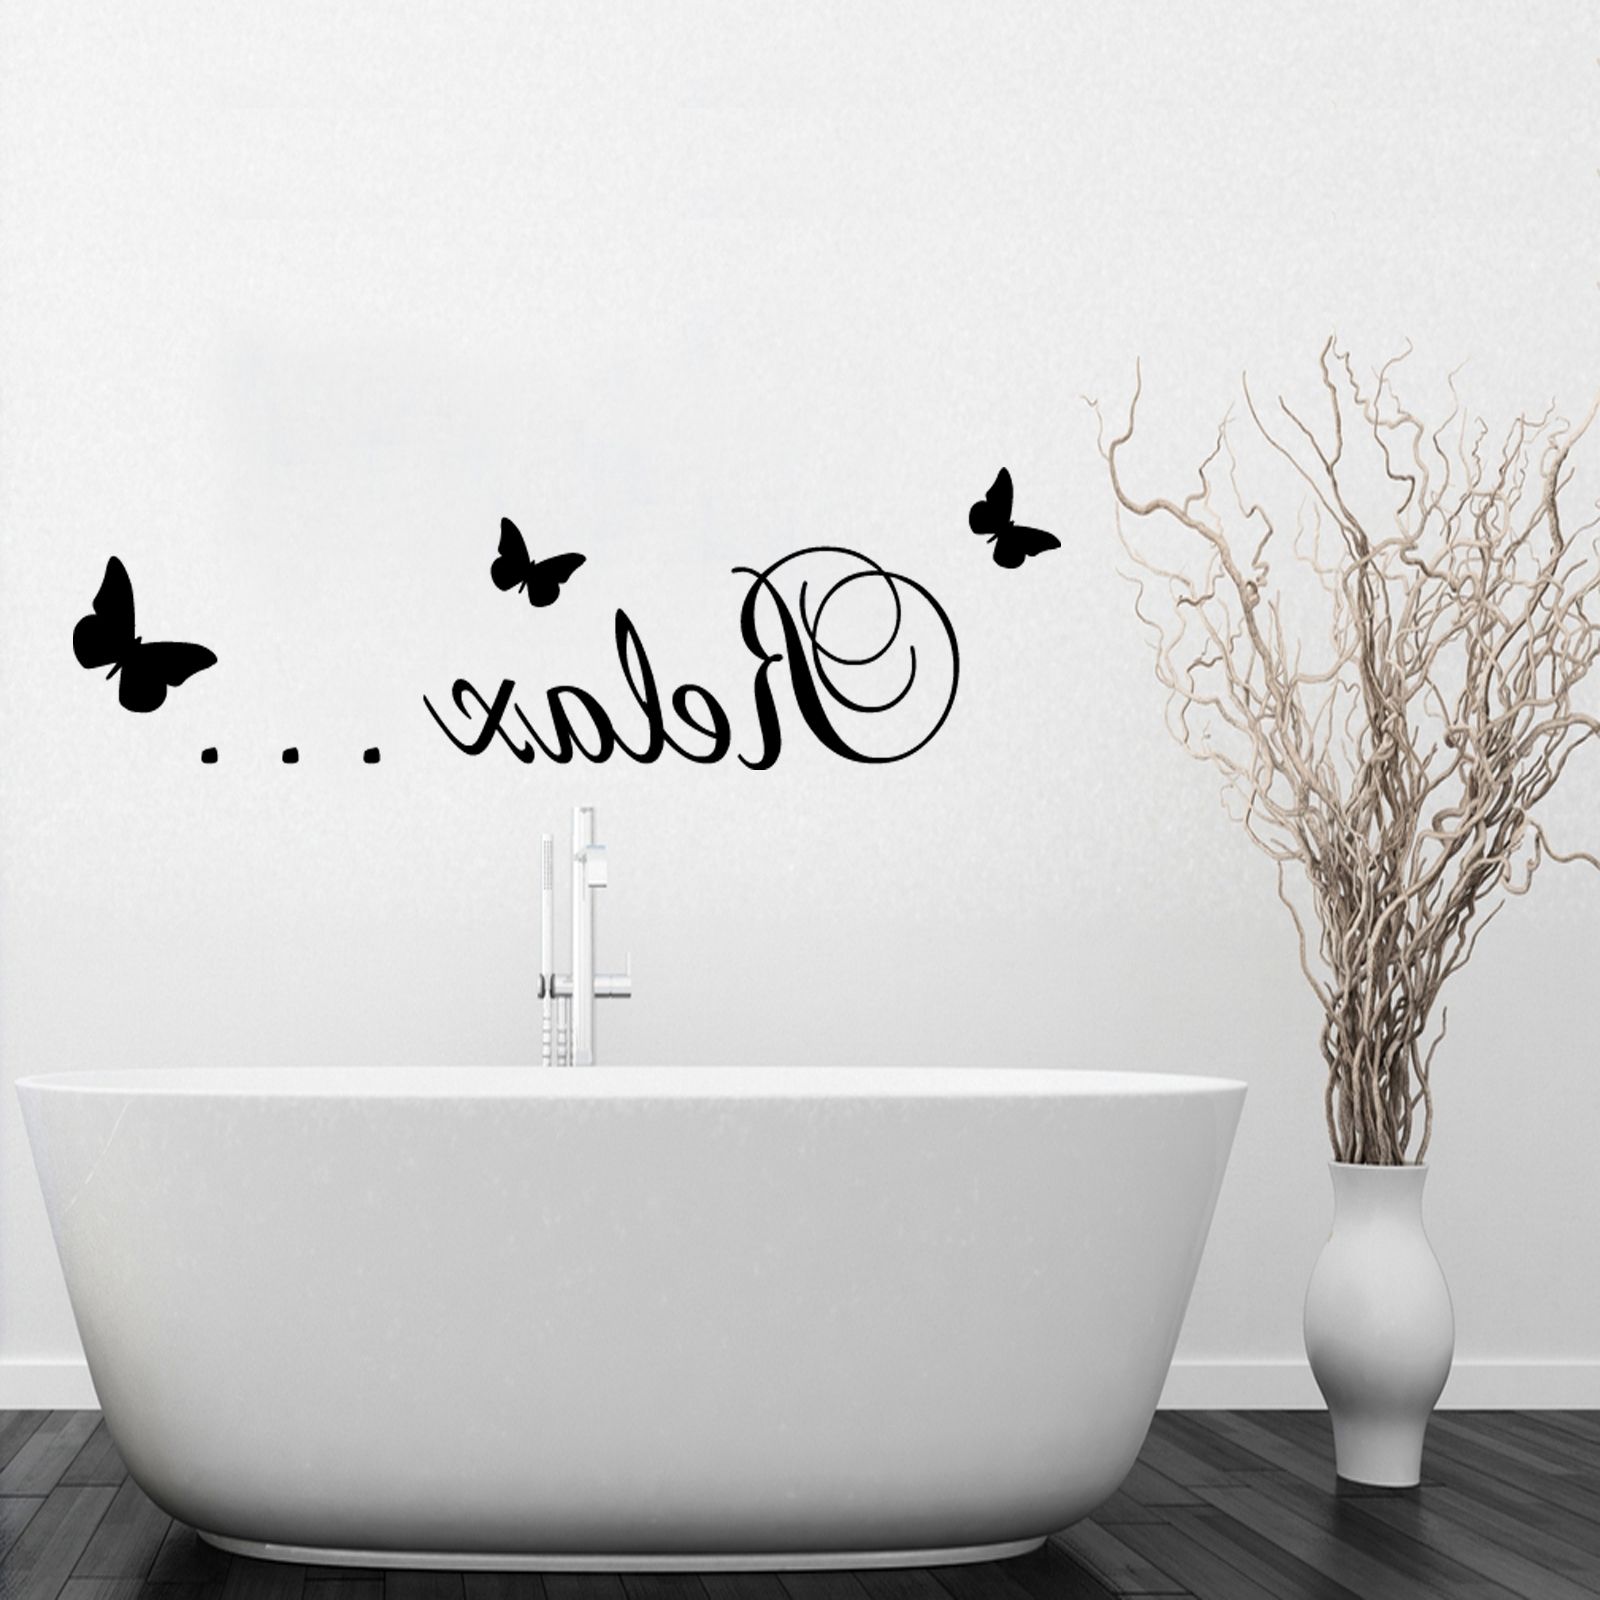 Bathroom Wall Art Decals Soap And Water Bathroom Wall Art Decal In Current Relax Wall Art (View 8 of 15)